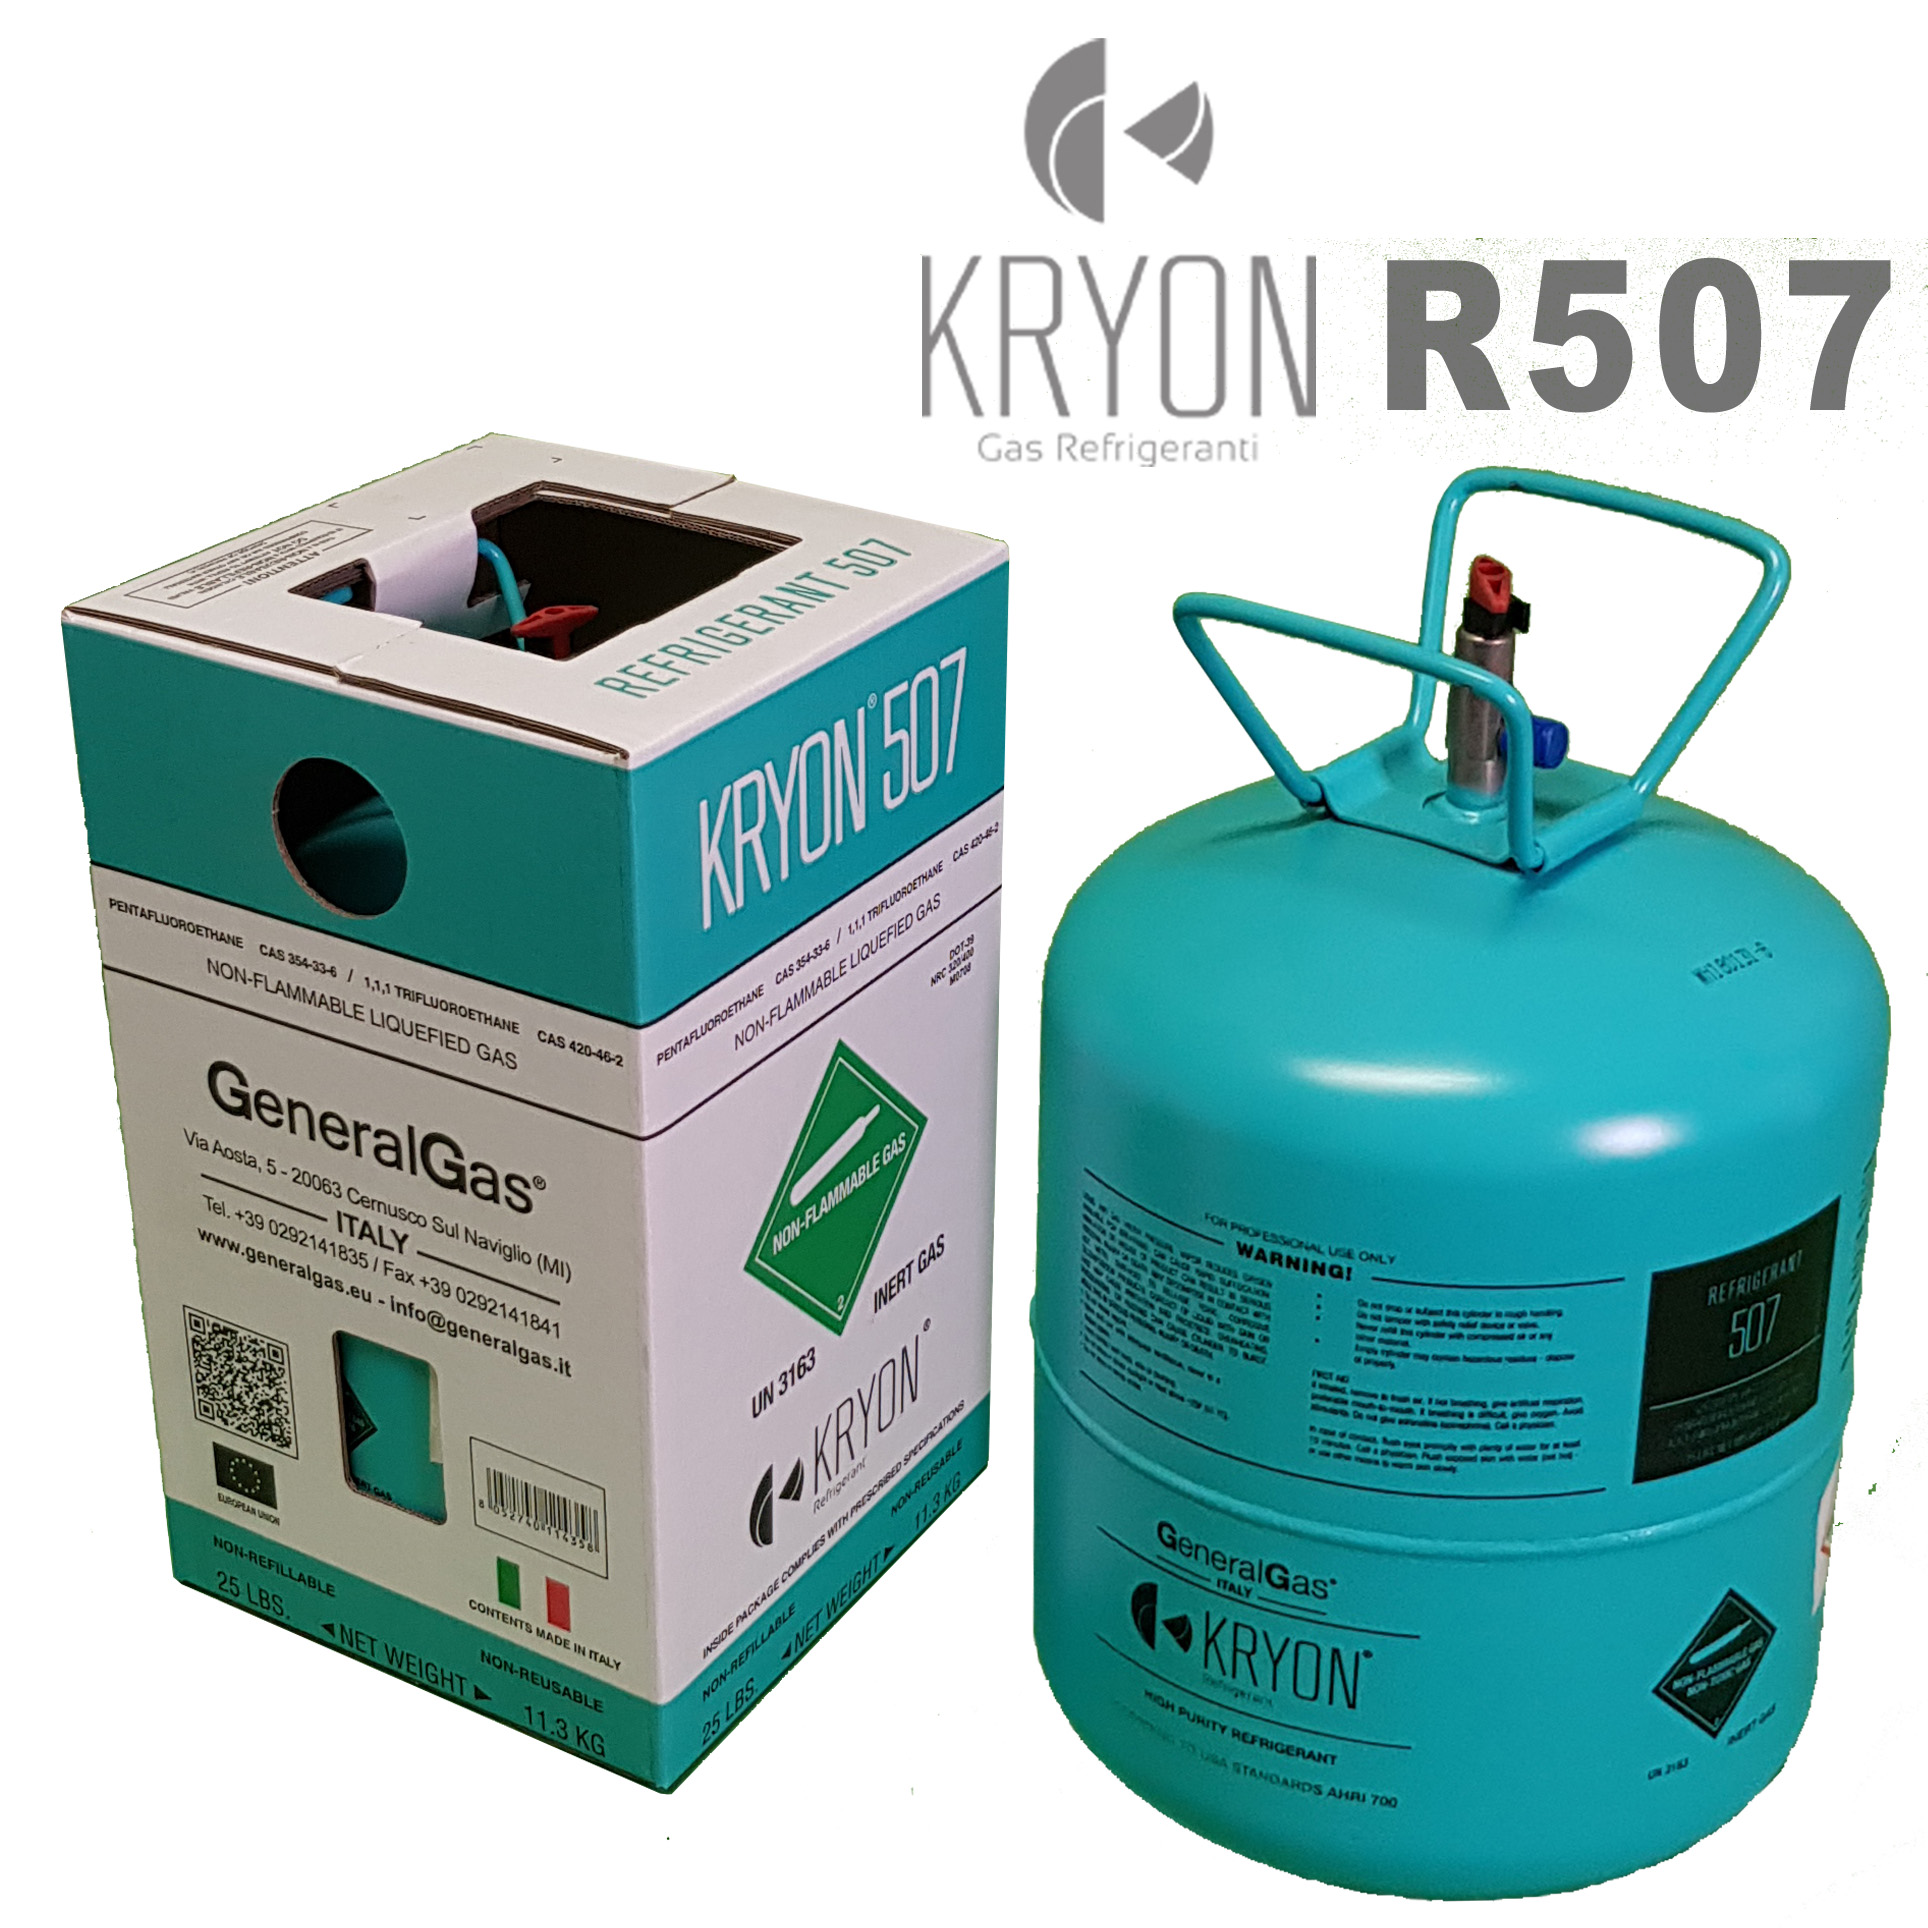 R507 Kryon® 507 in DOT39 (USA standard) non-refillable cylinder 13,77 Lt / 27 Bar - valve ¼ SAE RH - net 11,3 Kg - MADE IN ITALY European Union (gas quality meets AHRI700-2019 std.)